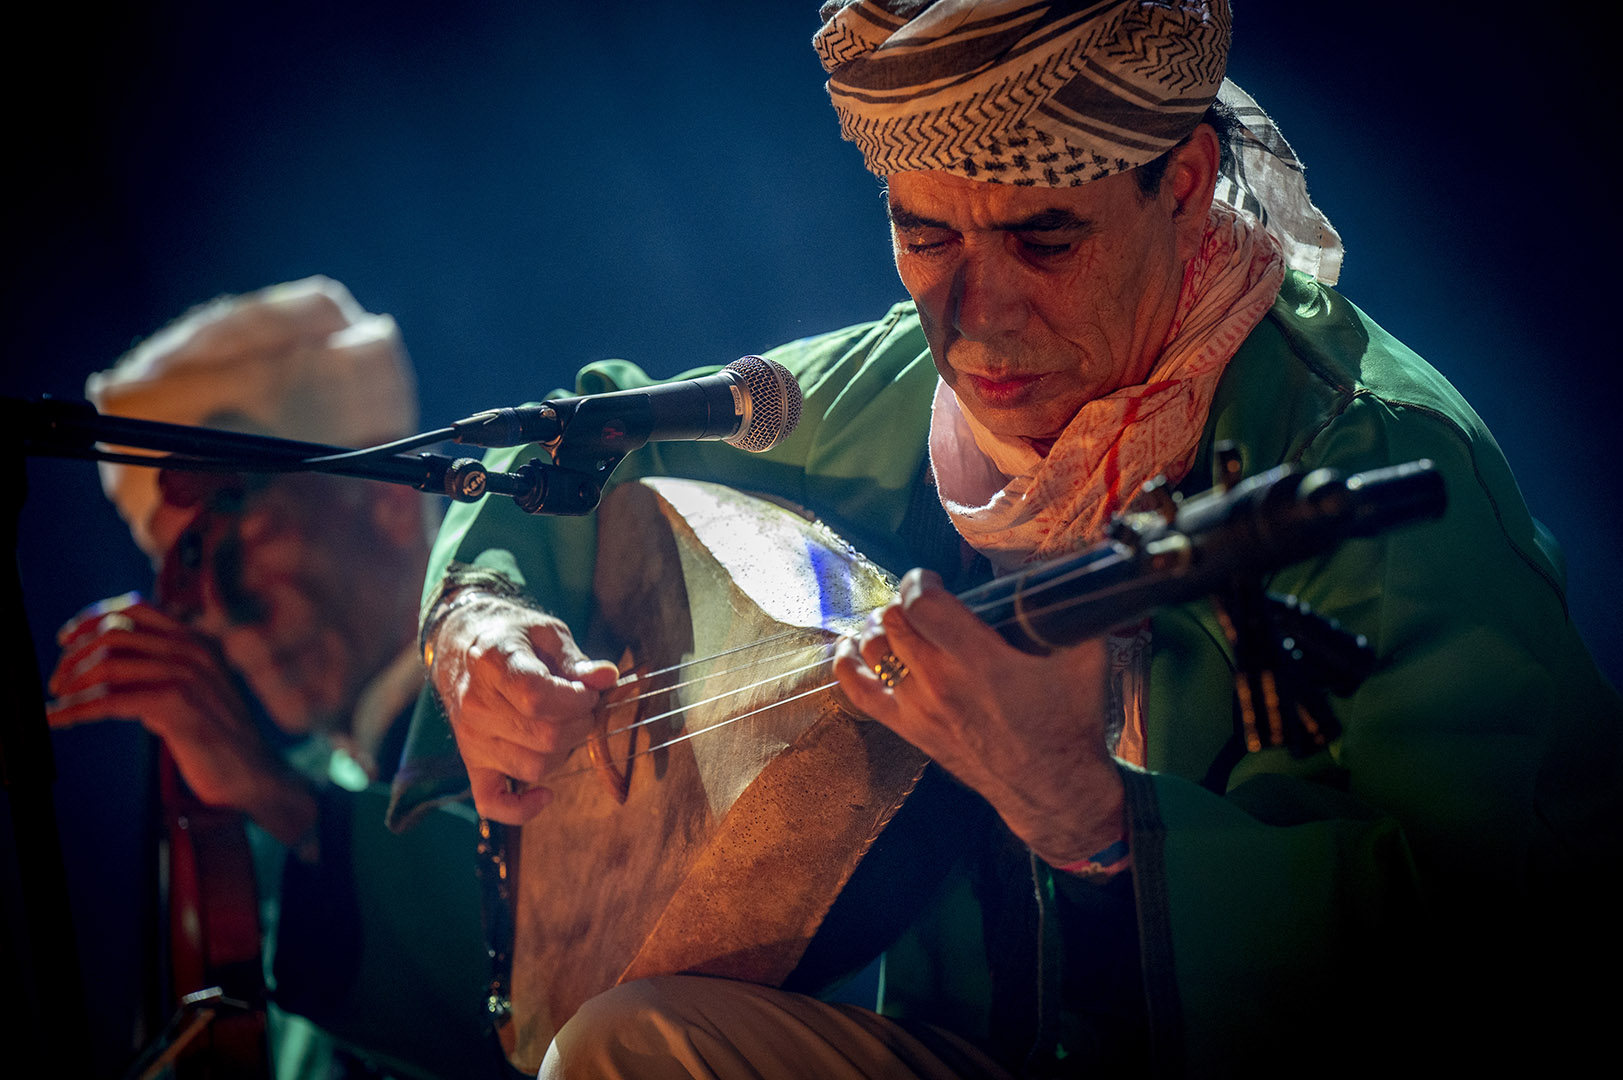 The Master Musicians of Jajouka led by Bachir Attar - Live at Le Guess Who? 2022